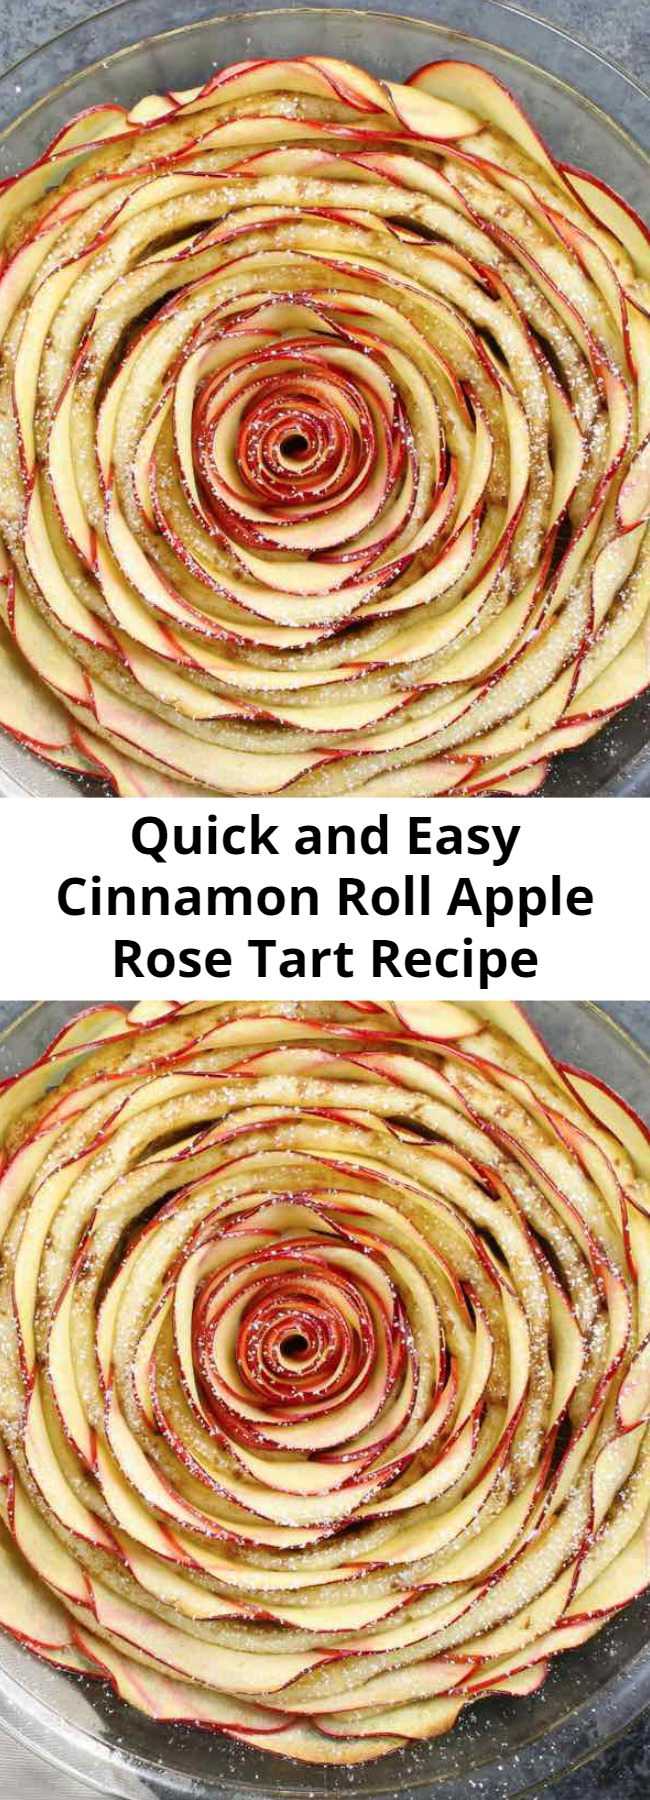 Quick and Easy Cinnamon Roll Apple Rose Tart Recipe - Wow your guests with this beautiful Cinnamon Roll Apple Rose Tart. It’s so easy to make and perfect for a party! Made with fresh apples. All you need is only 5 simple ingredients: cinnamon roll dough, red apples, lemon juice, brown sugar and butter. So beautiful! Quick and easy recipe.